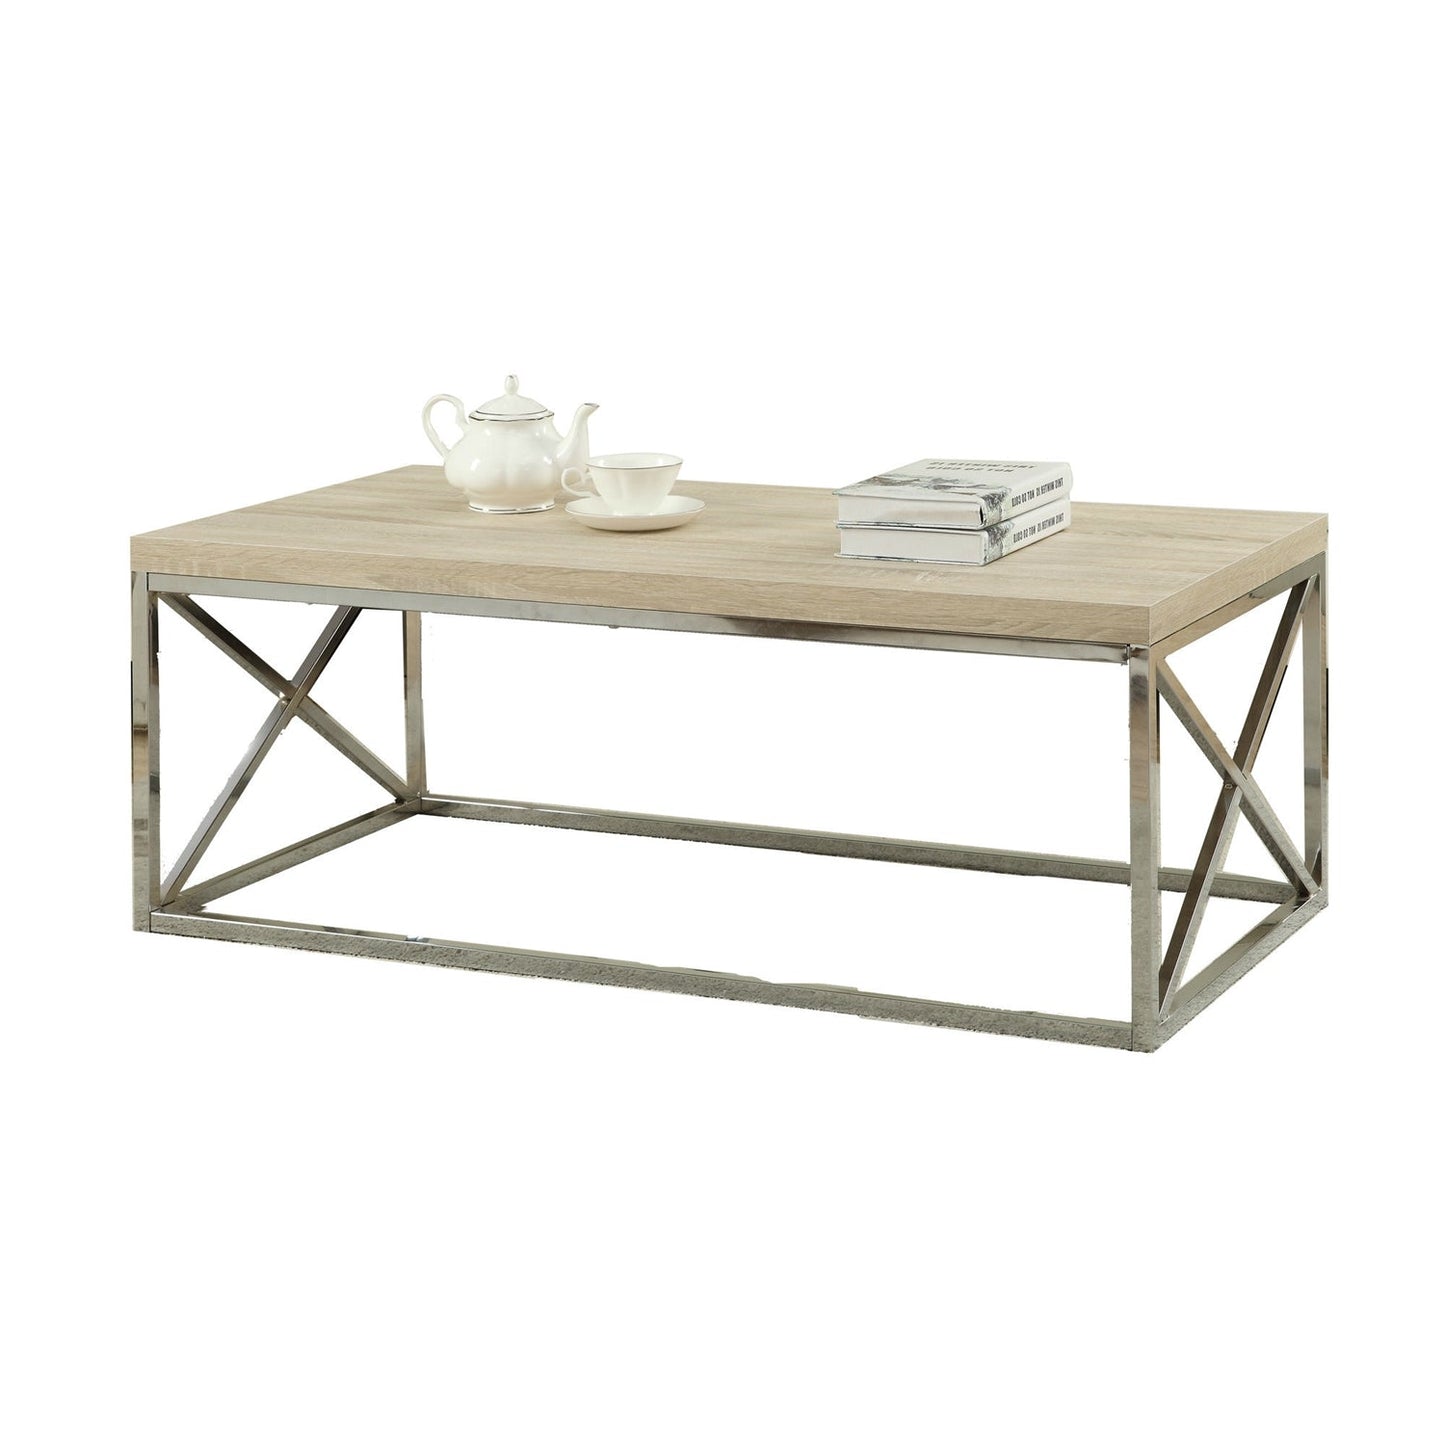 Living Room > Coffee Tables - Modern Rectangular Coffee Table With Natural Wood Top And Metal Legs